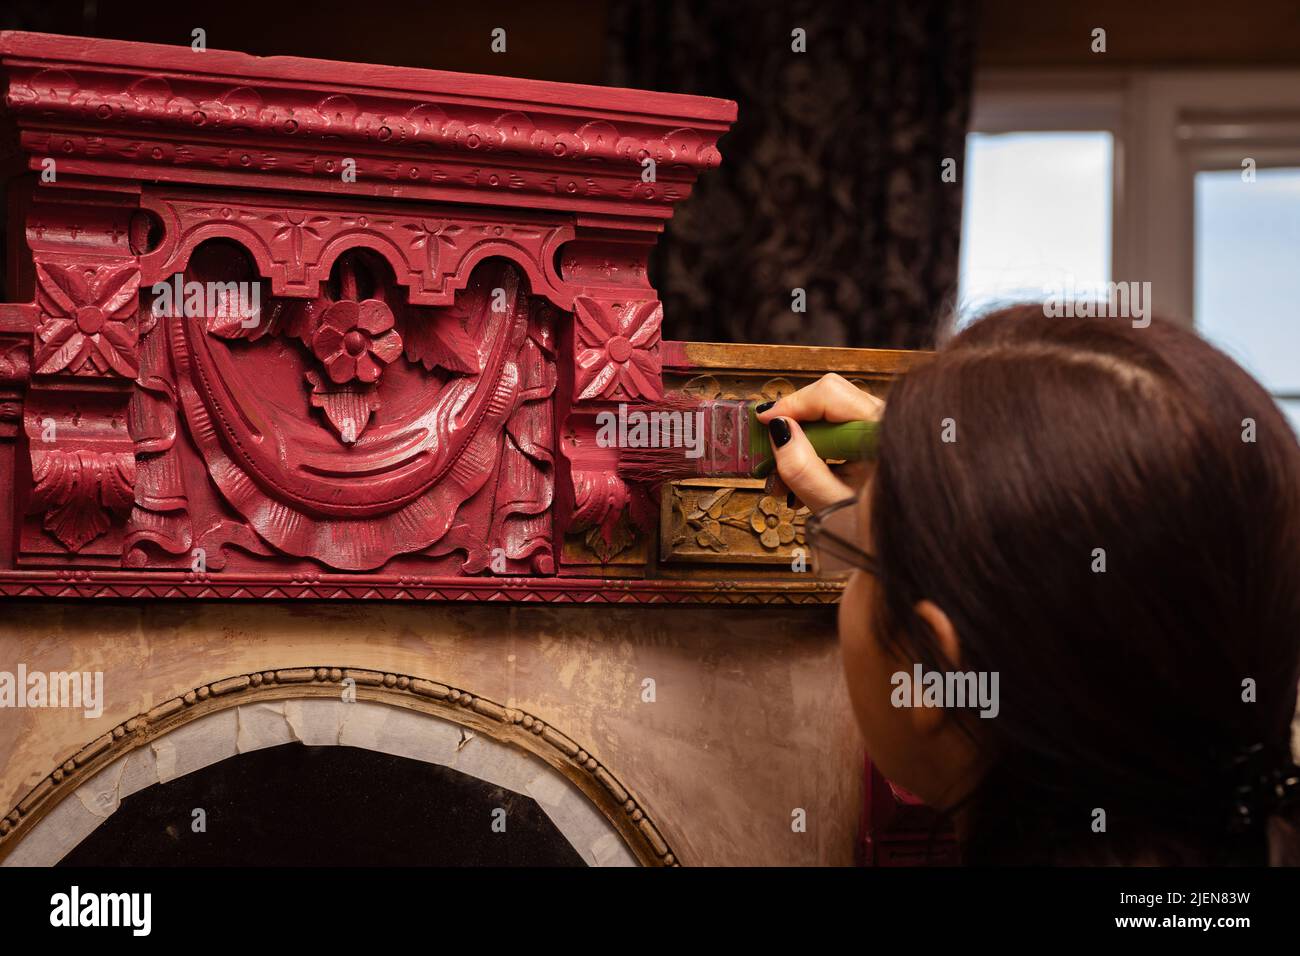 Woman painting upper part of ornamented wooden cupboard in pink with paint brush in hand. Giving new life to old things. Home furniture renovation Stock Photo